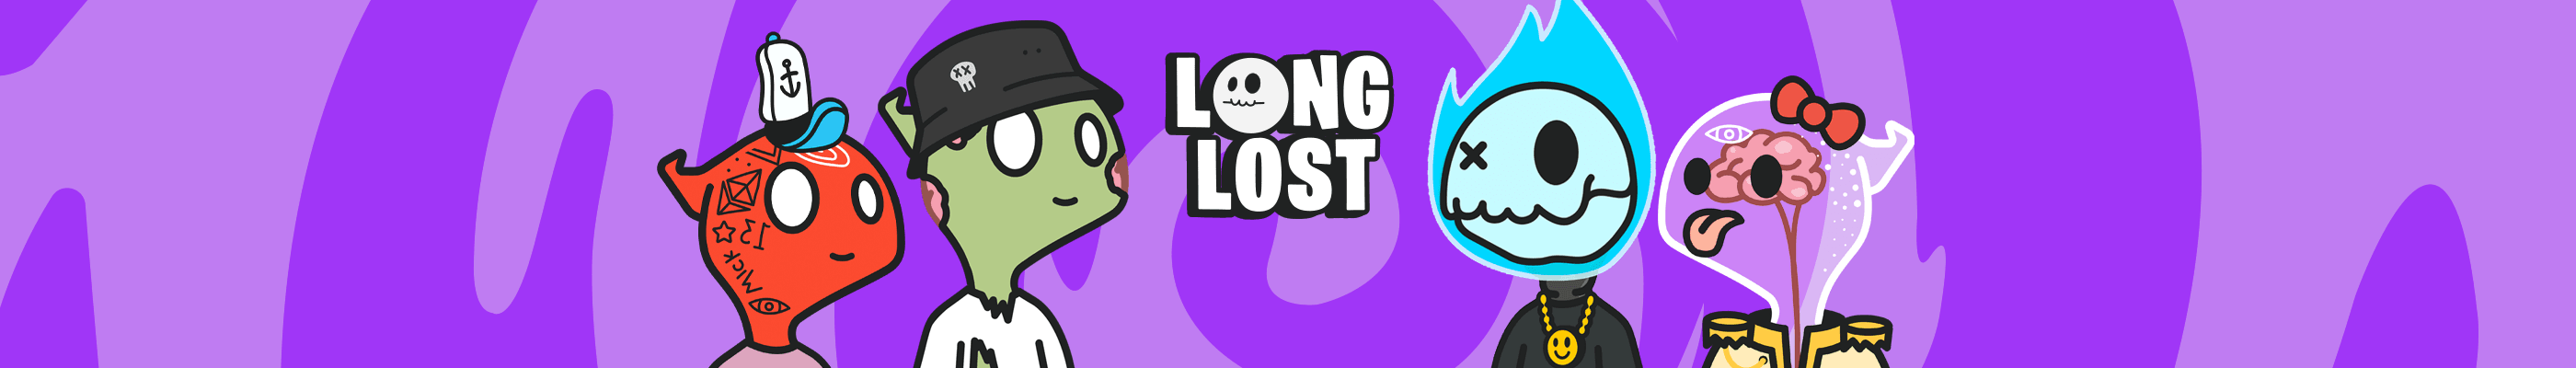 TheLongLost banner